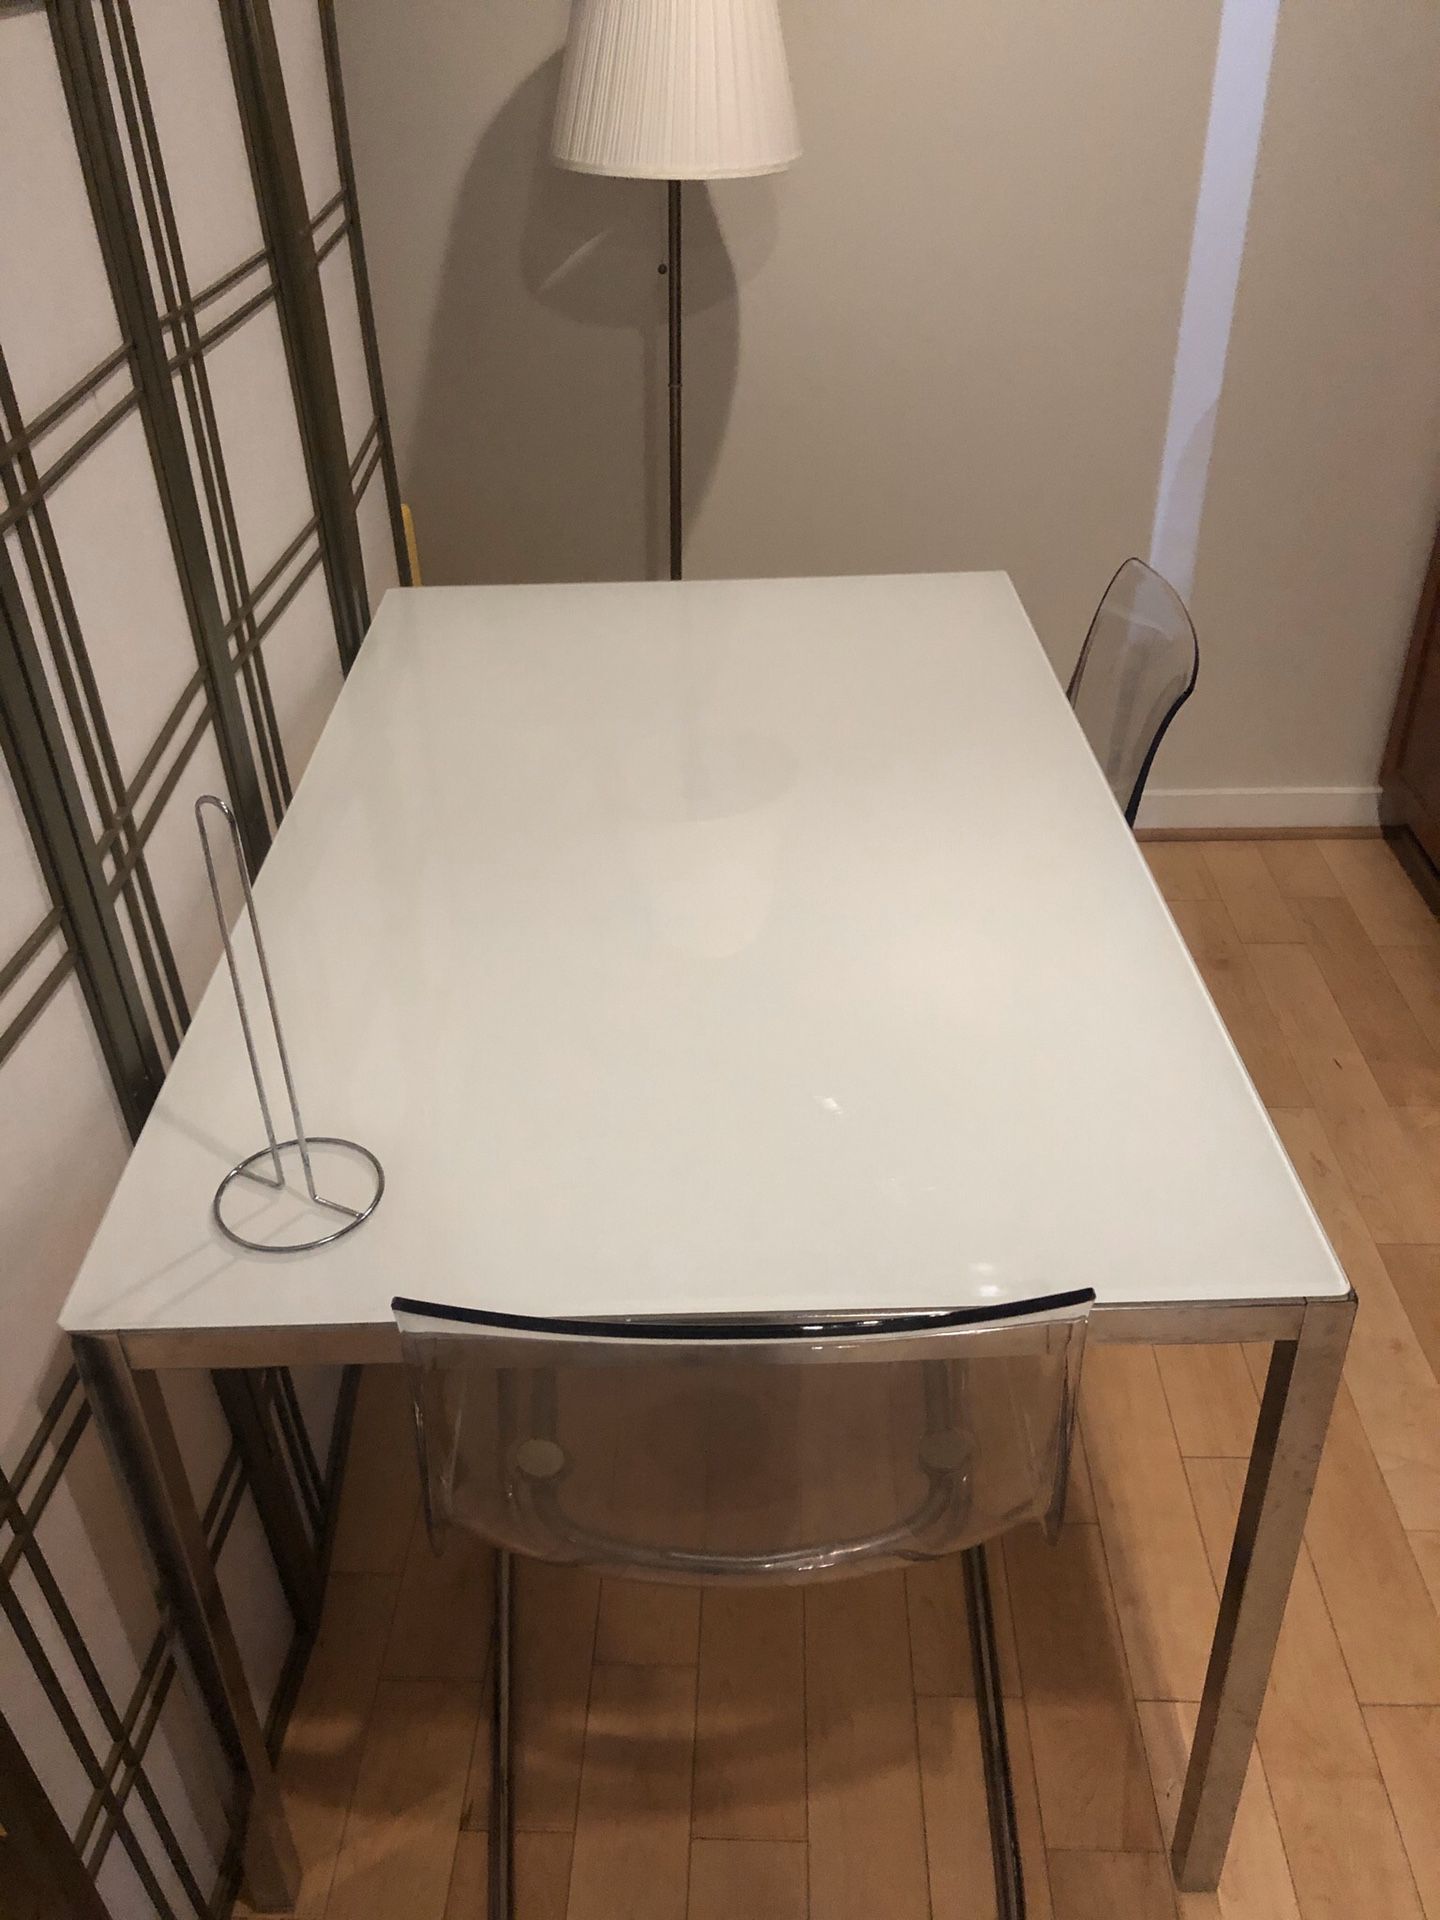 IKEA glass dinning table. No stains and damage.